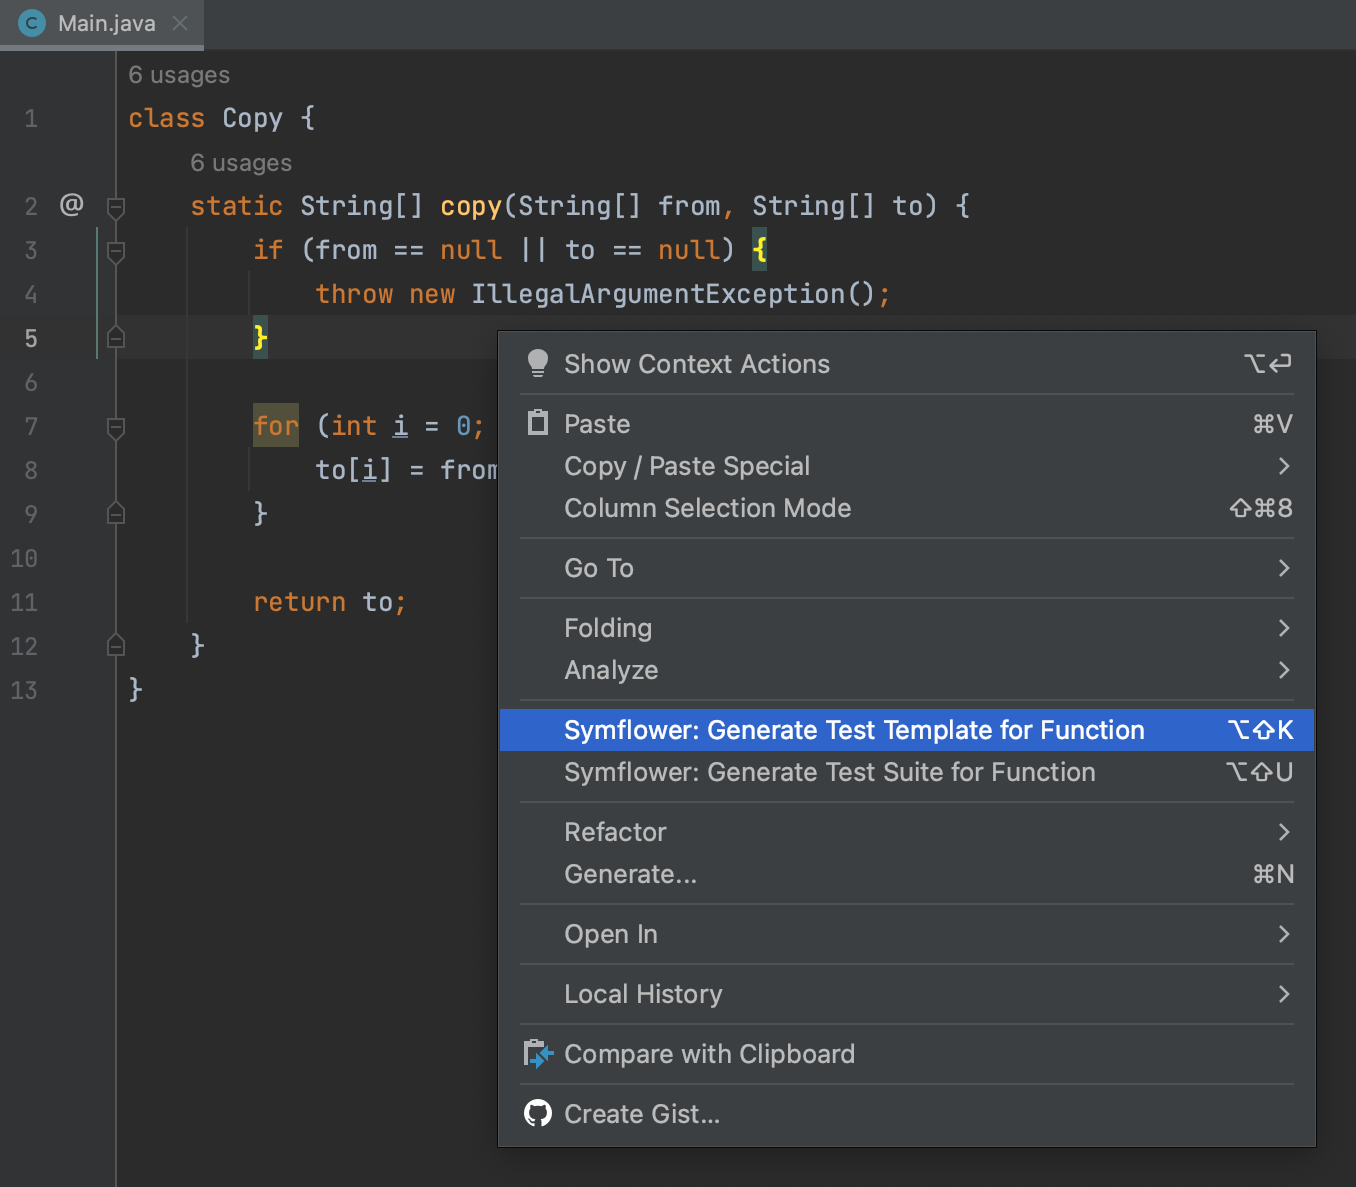 Use your IntelliJ IDE's context menu to access Symflower's functions